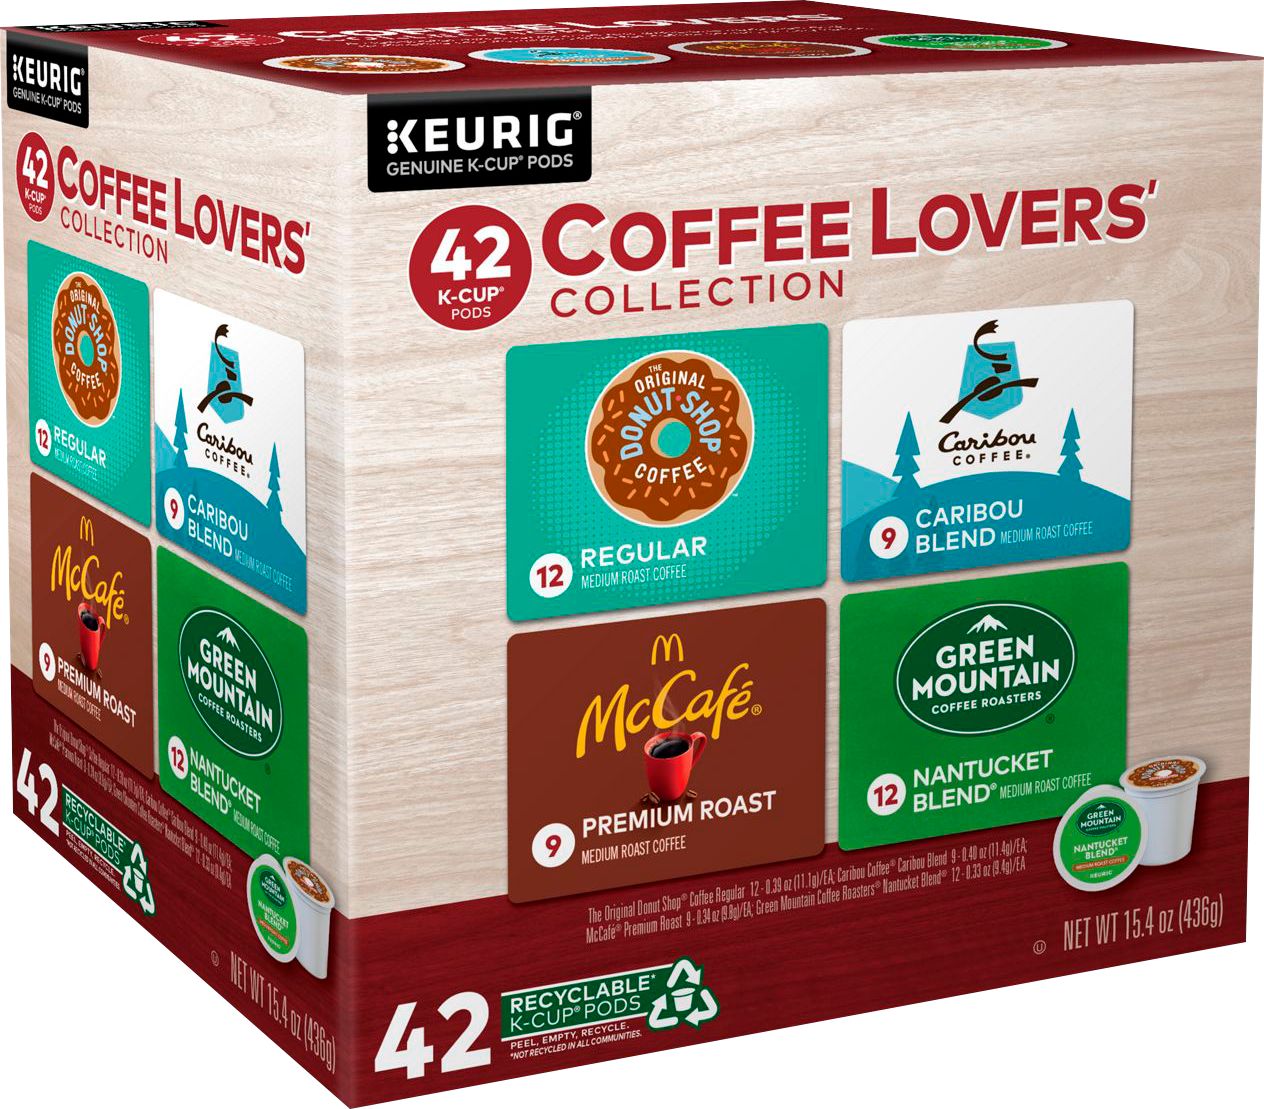 Angle View: Green Mountain Coffee - Colombia Select Coffee, Keurig Single-Serve K-Cup Pods, Medium Roast Coffee, 24 Count